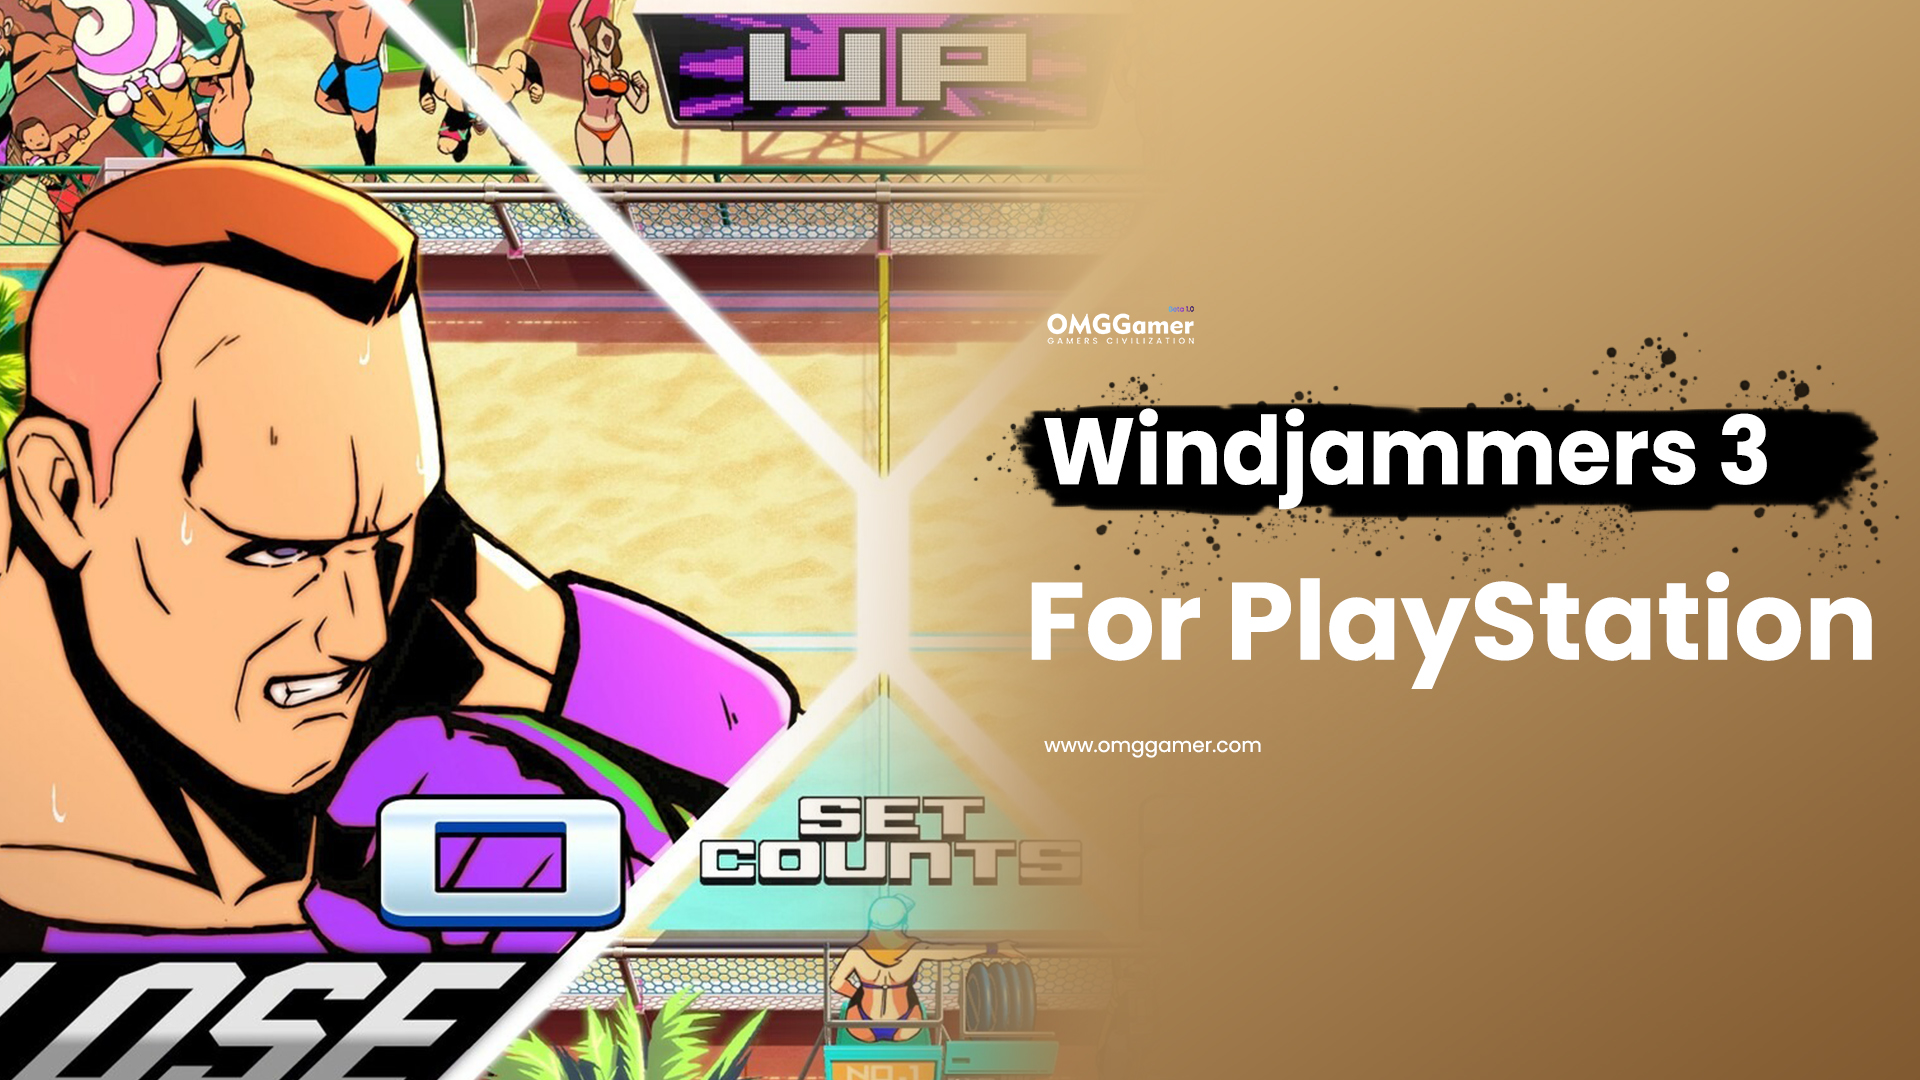 Windjammers 3 for PlayStation